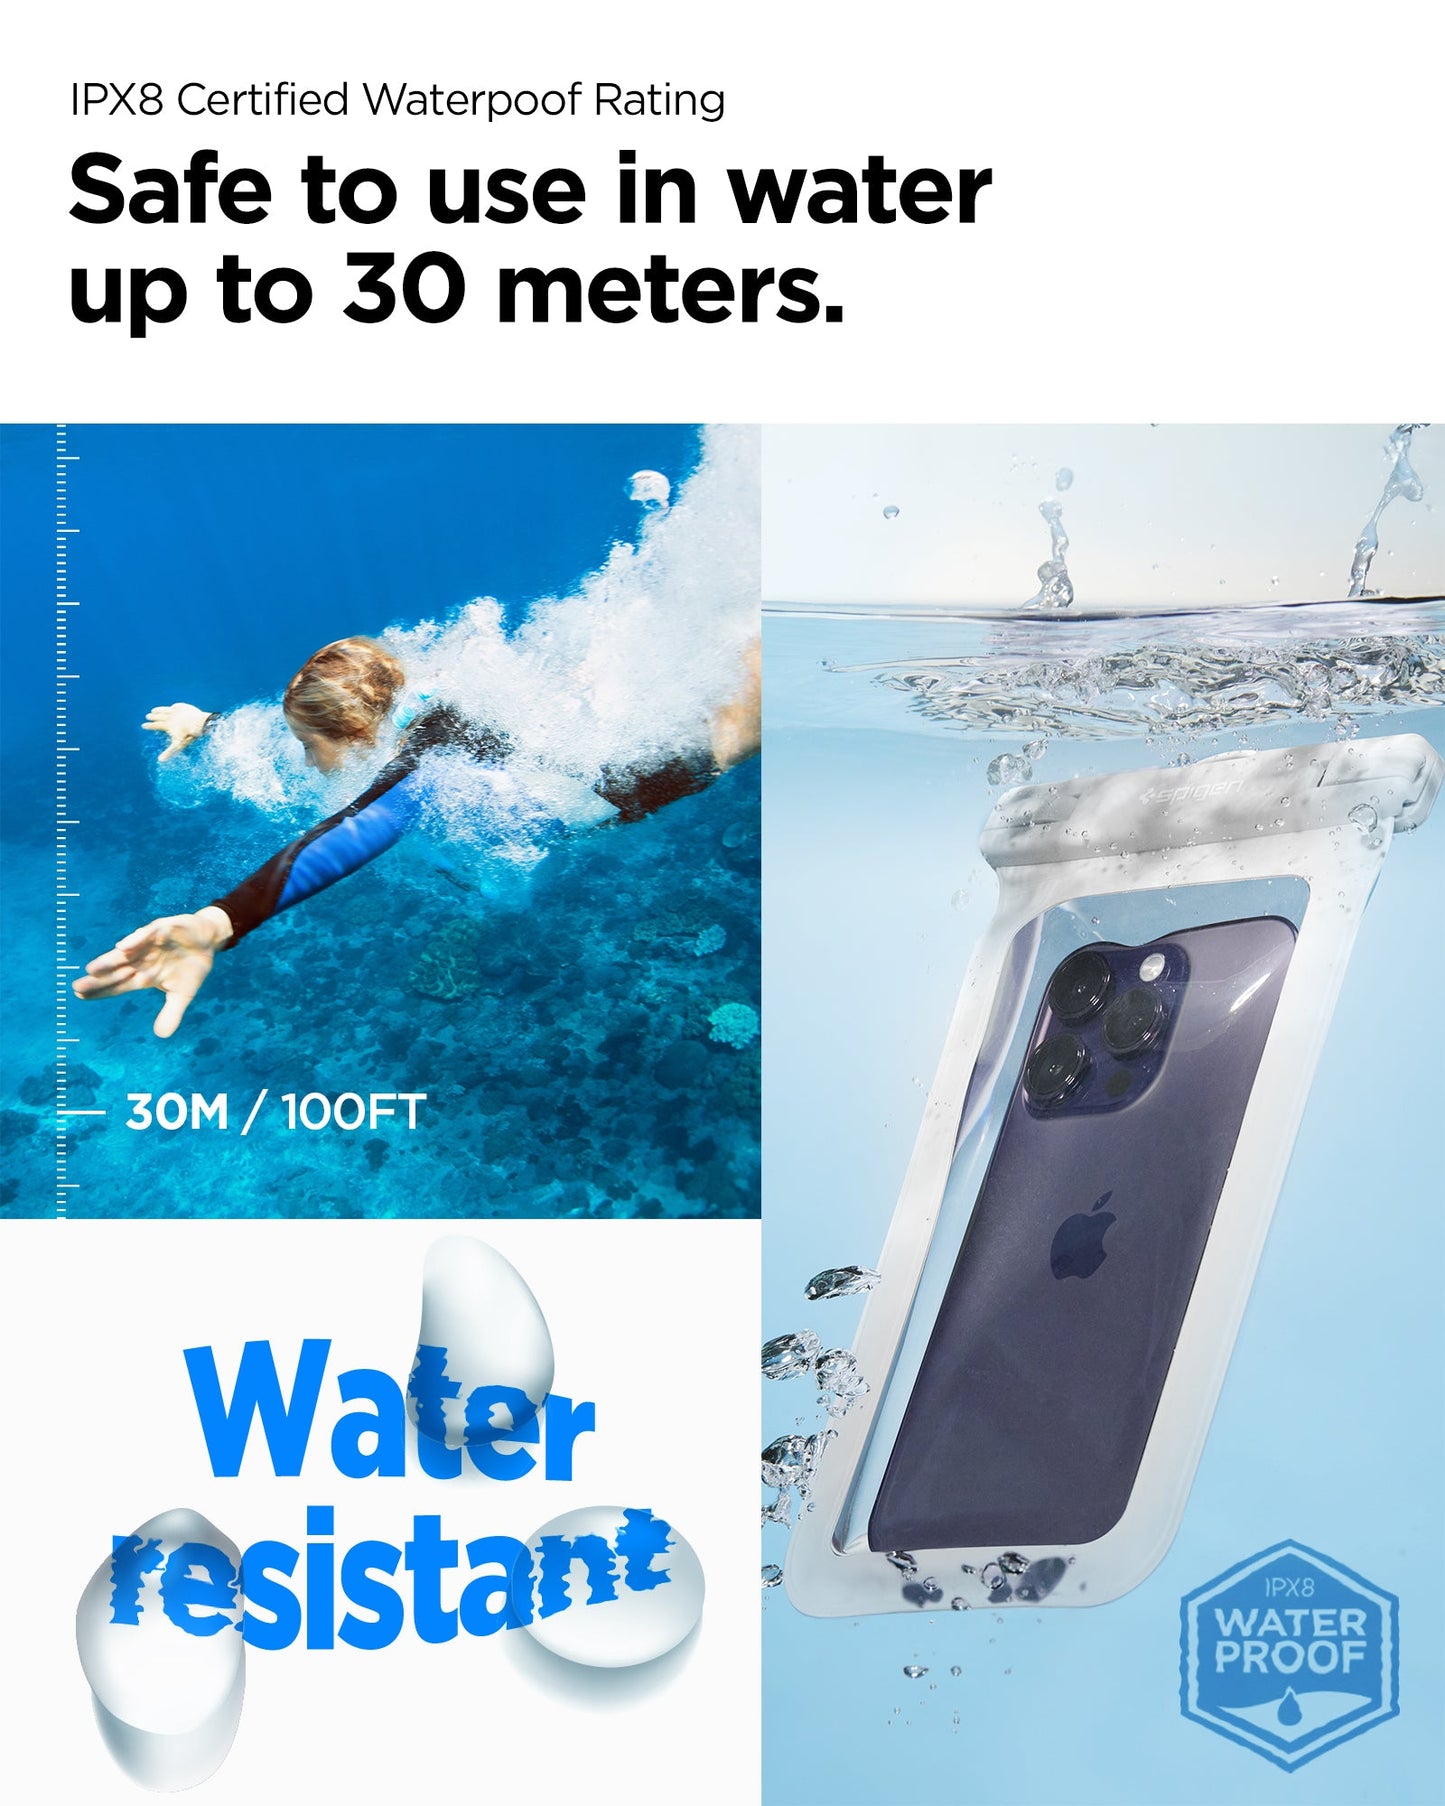 ACS06013 - AquaShield Waterproof Case (2 Pack) A601 in Crystal Clear showing the IPX8 Certified Waterproof Rating, safe to use in water up to 30M/100FT water resistant